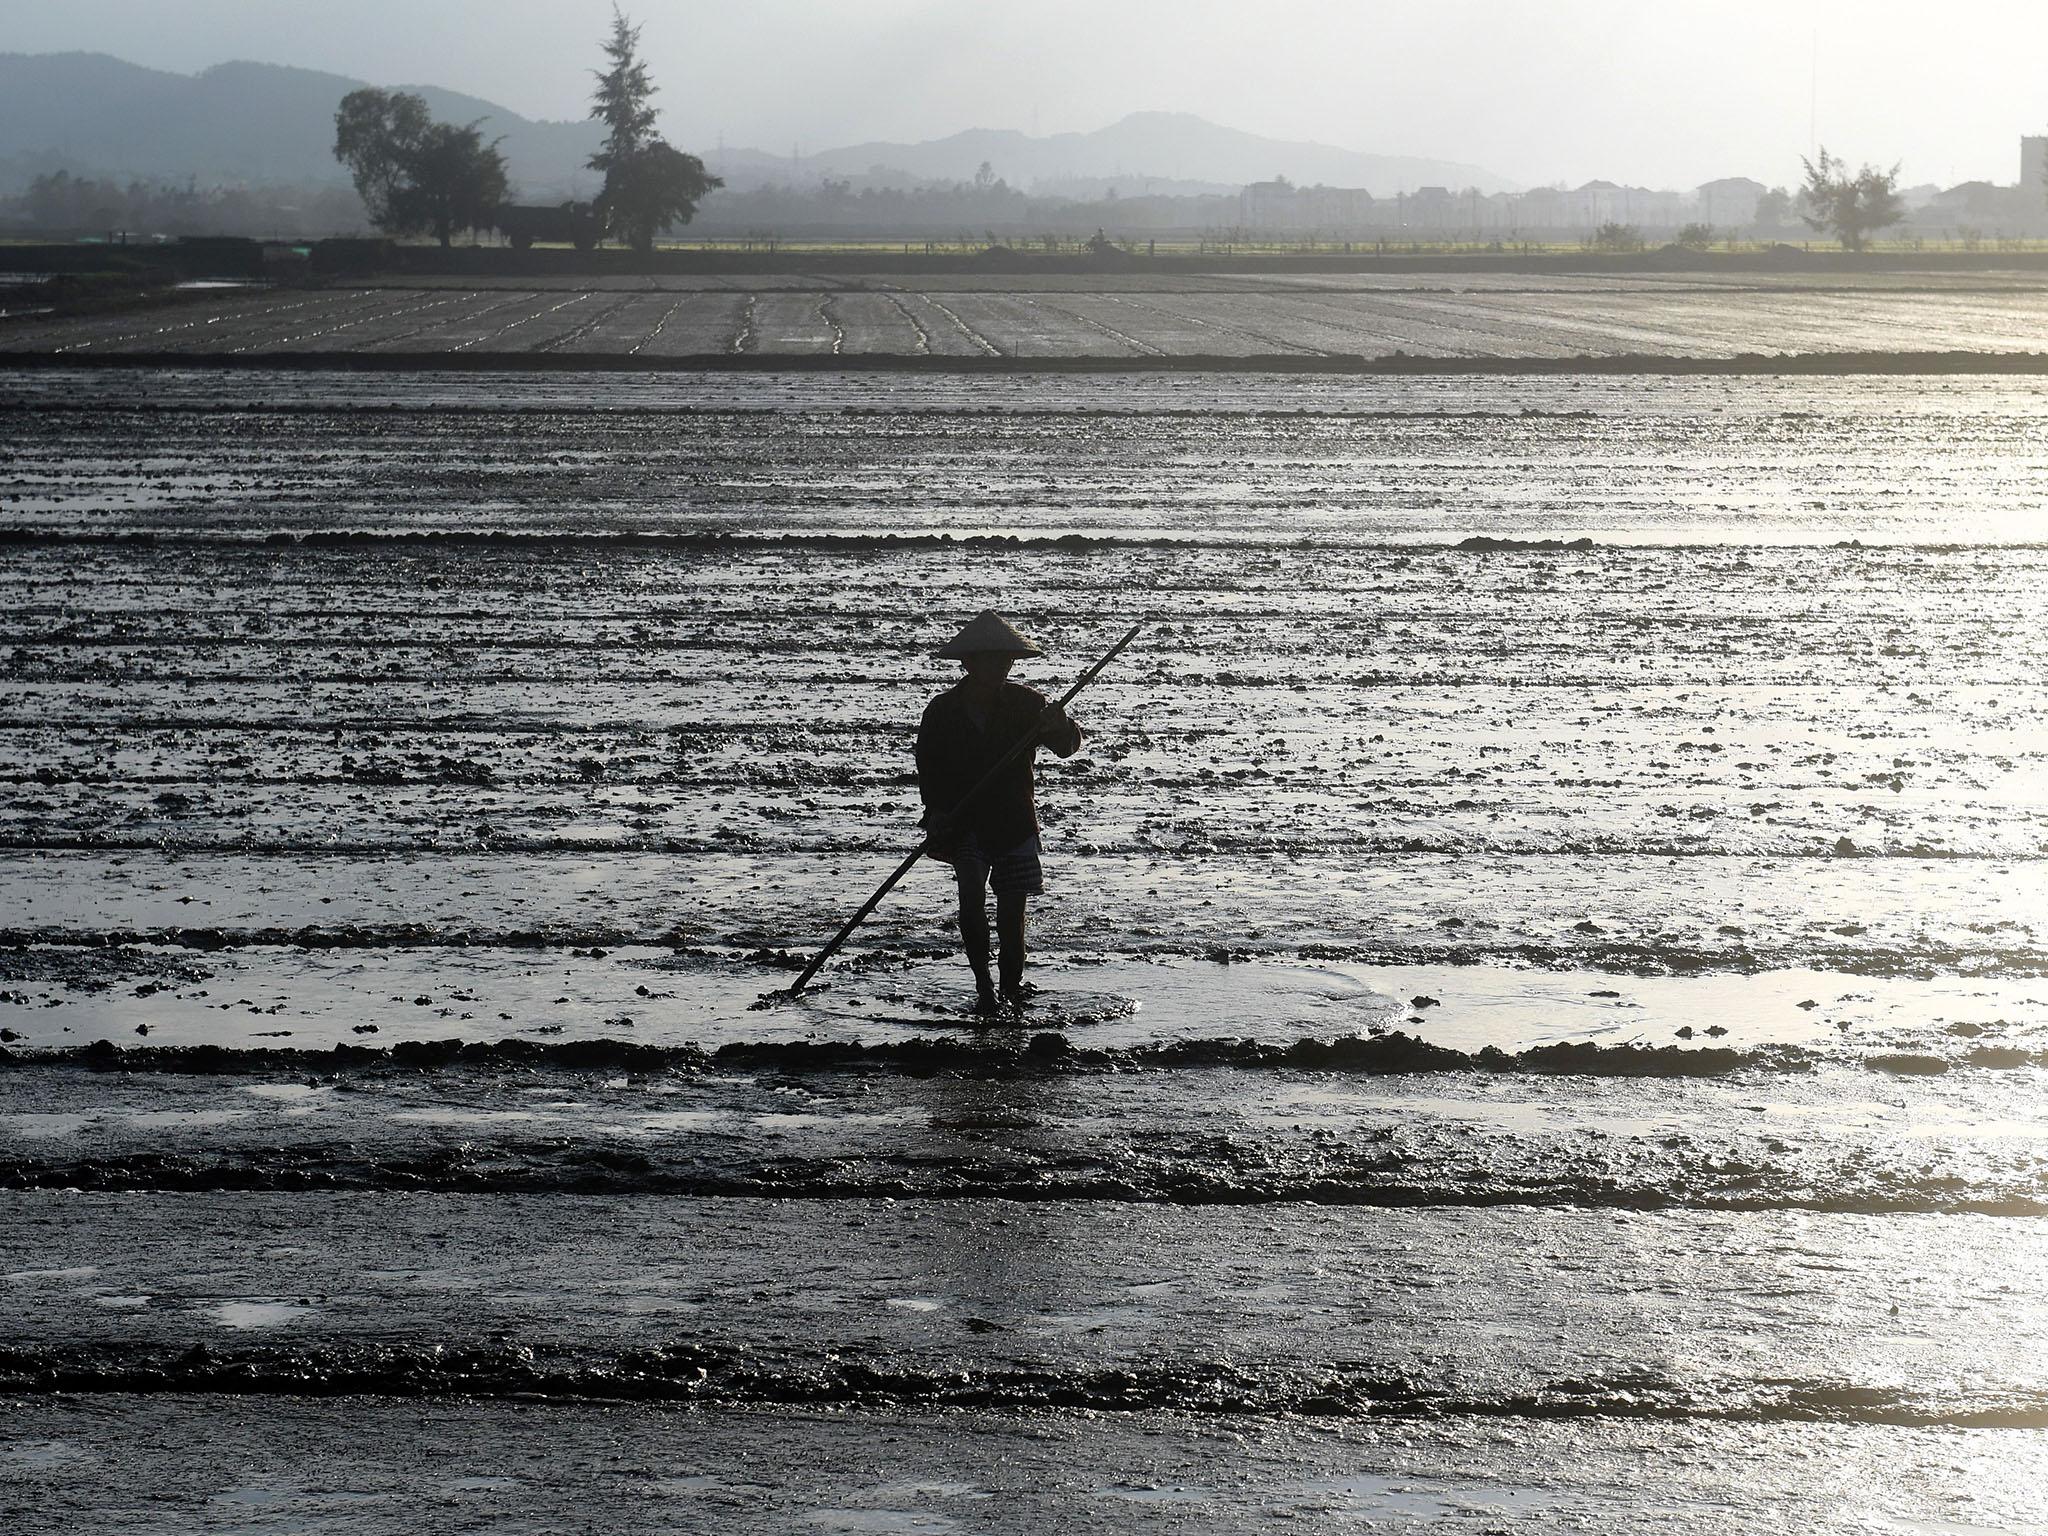 A worker in a paddy field. Man-made dykes are preventing proper nutrients from reaching the rice crop in certain areas of the delta